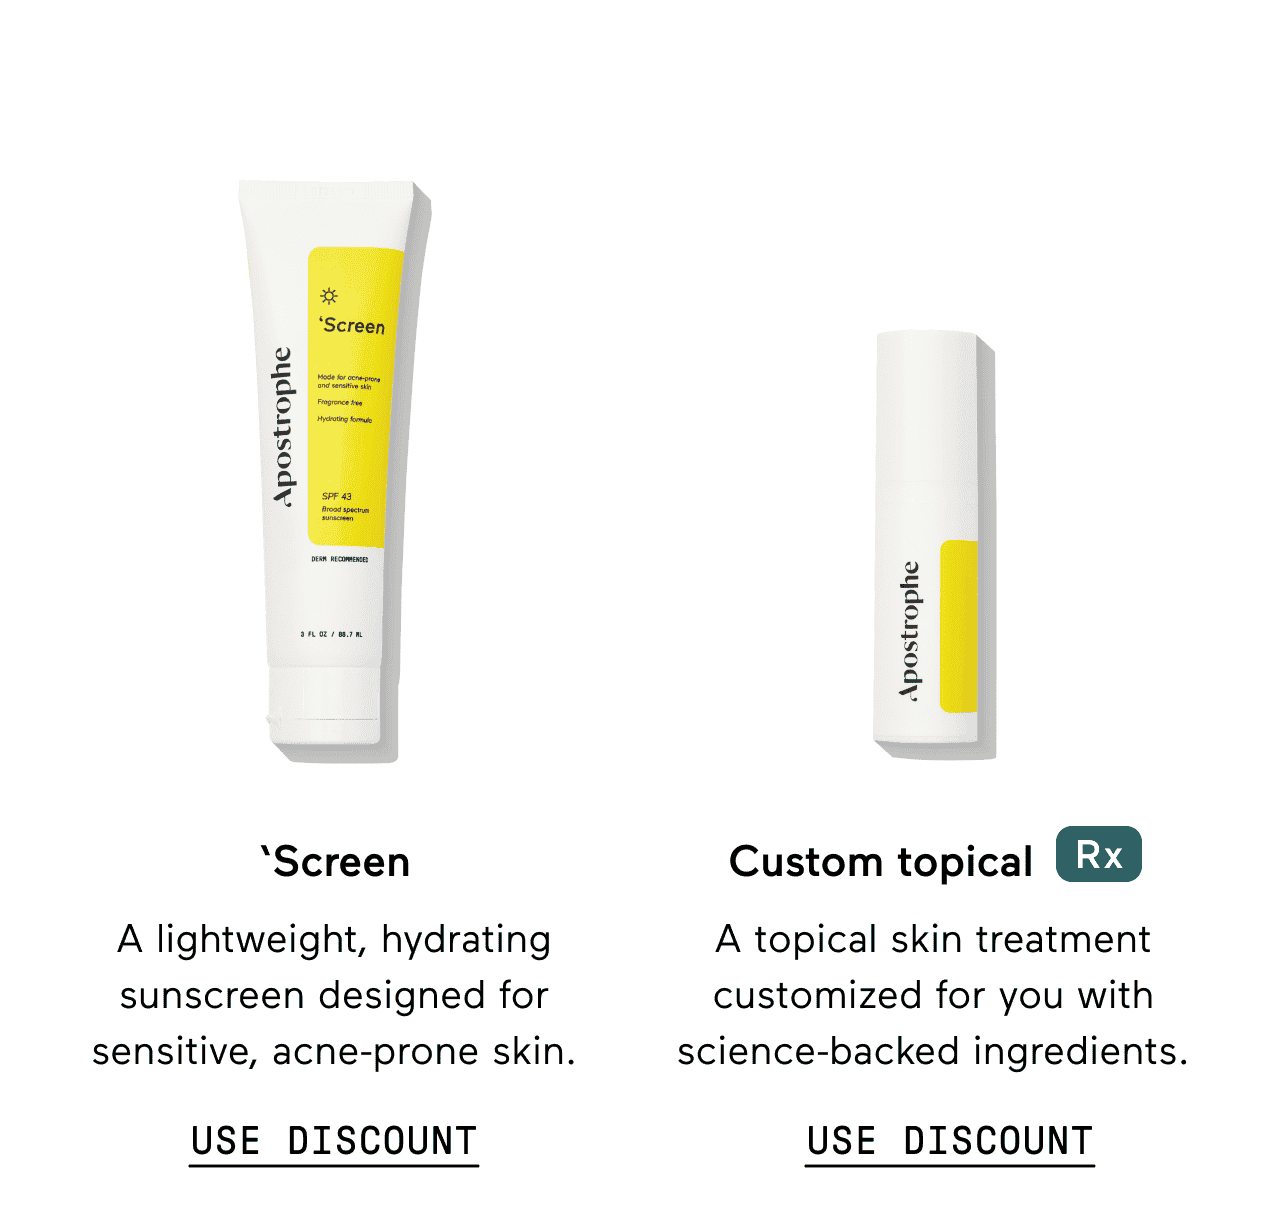 Screen. A lightweight, hydrating sunscreen designed for sensitive, acne-prone skin. Click here to use discount. Custom topical rx. A topical skin treatment customized for you with science-backed ingredients. Click here to use discount.